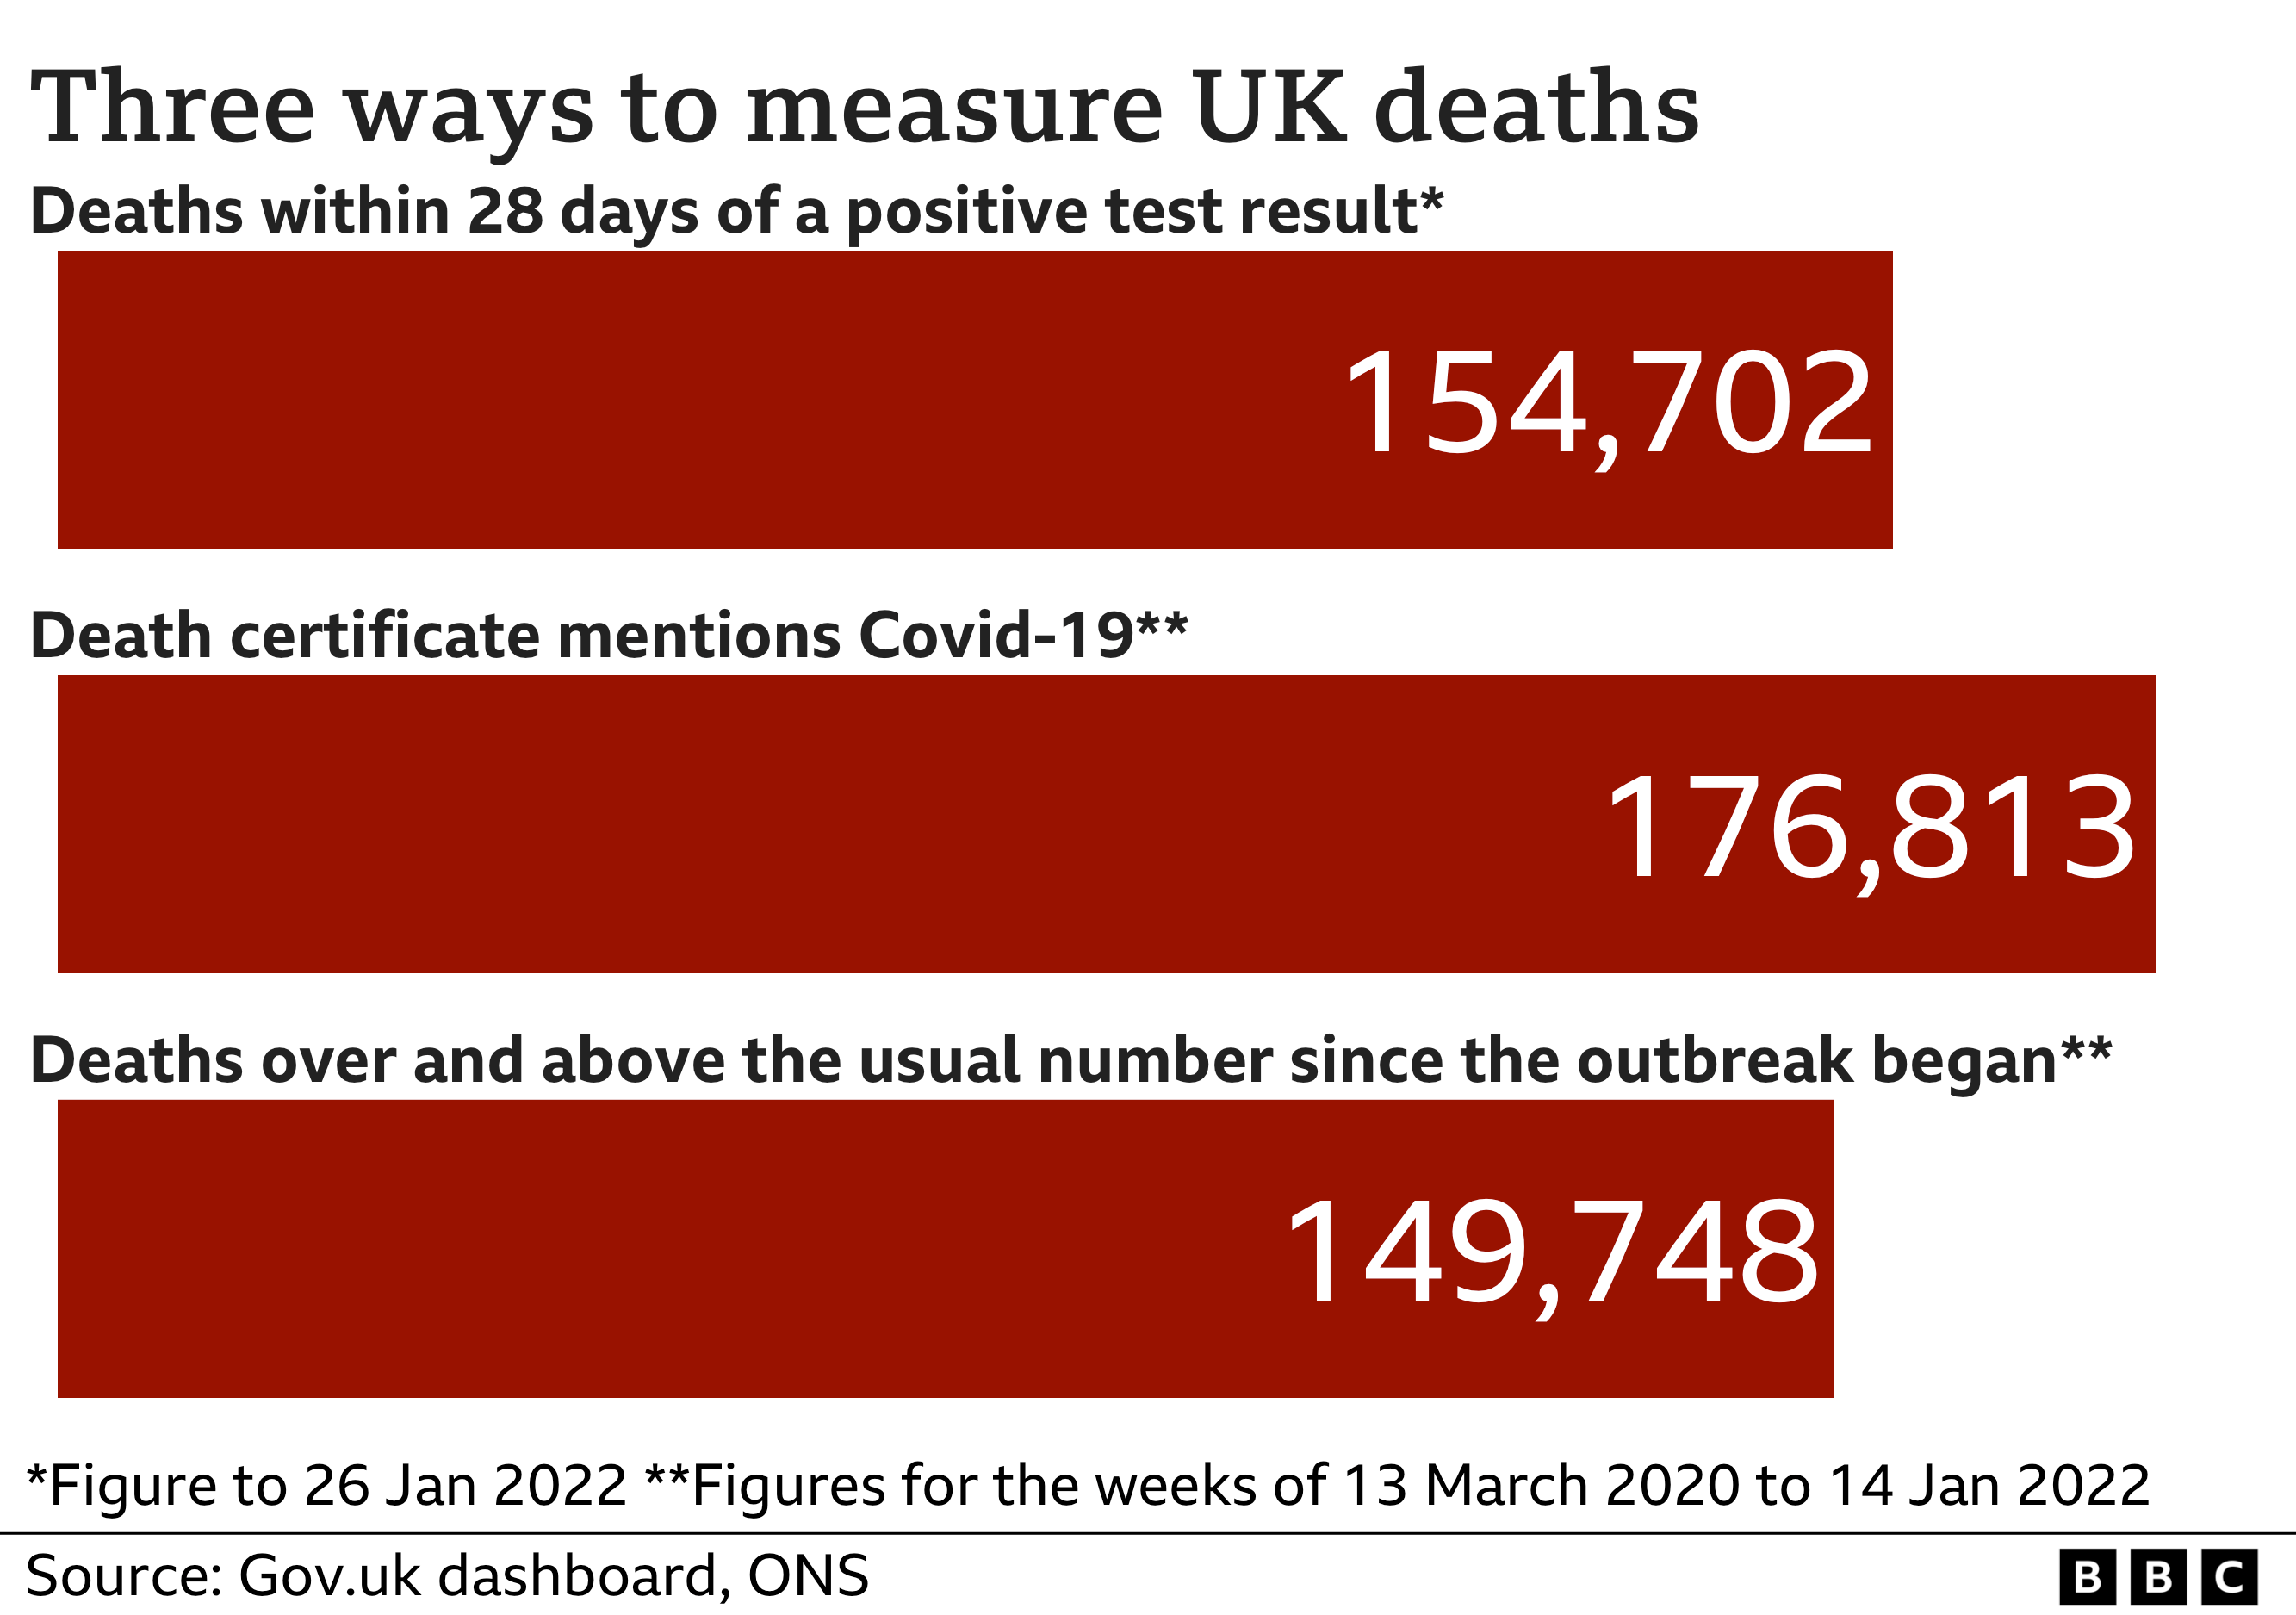 Chart showing the three ways of measuring deaths from Covid - the government figure of 154,702 includes all deaths within 28 days of a positive result; the ONS counts all death certificate mentions and that figure is now 176,813; the excess death figures is the number of deaths over and above the usual total and that figure is now 149,748